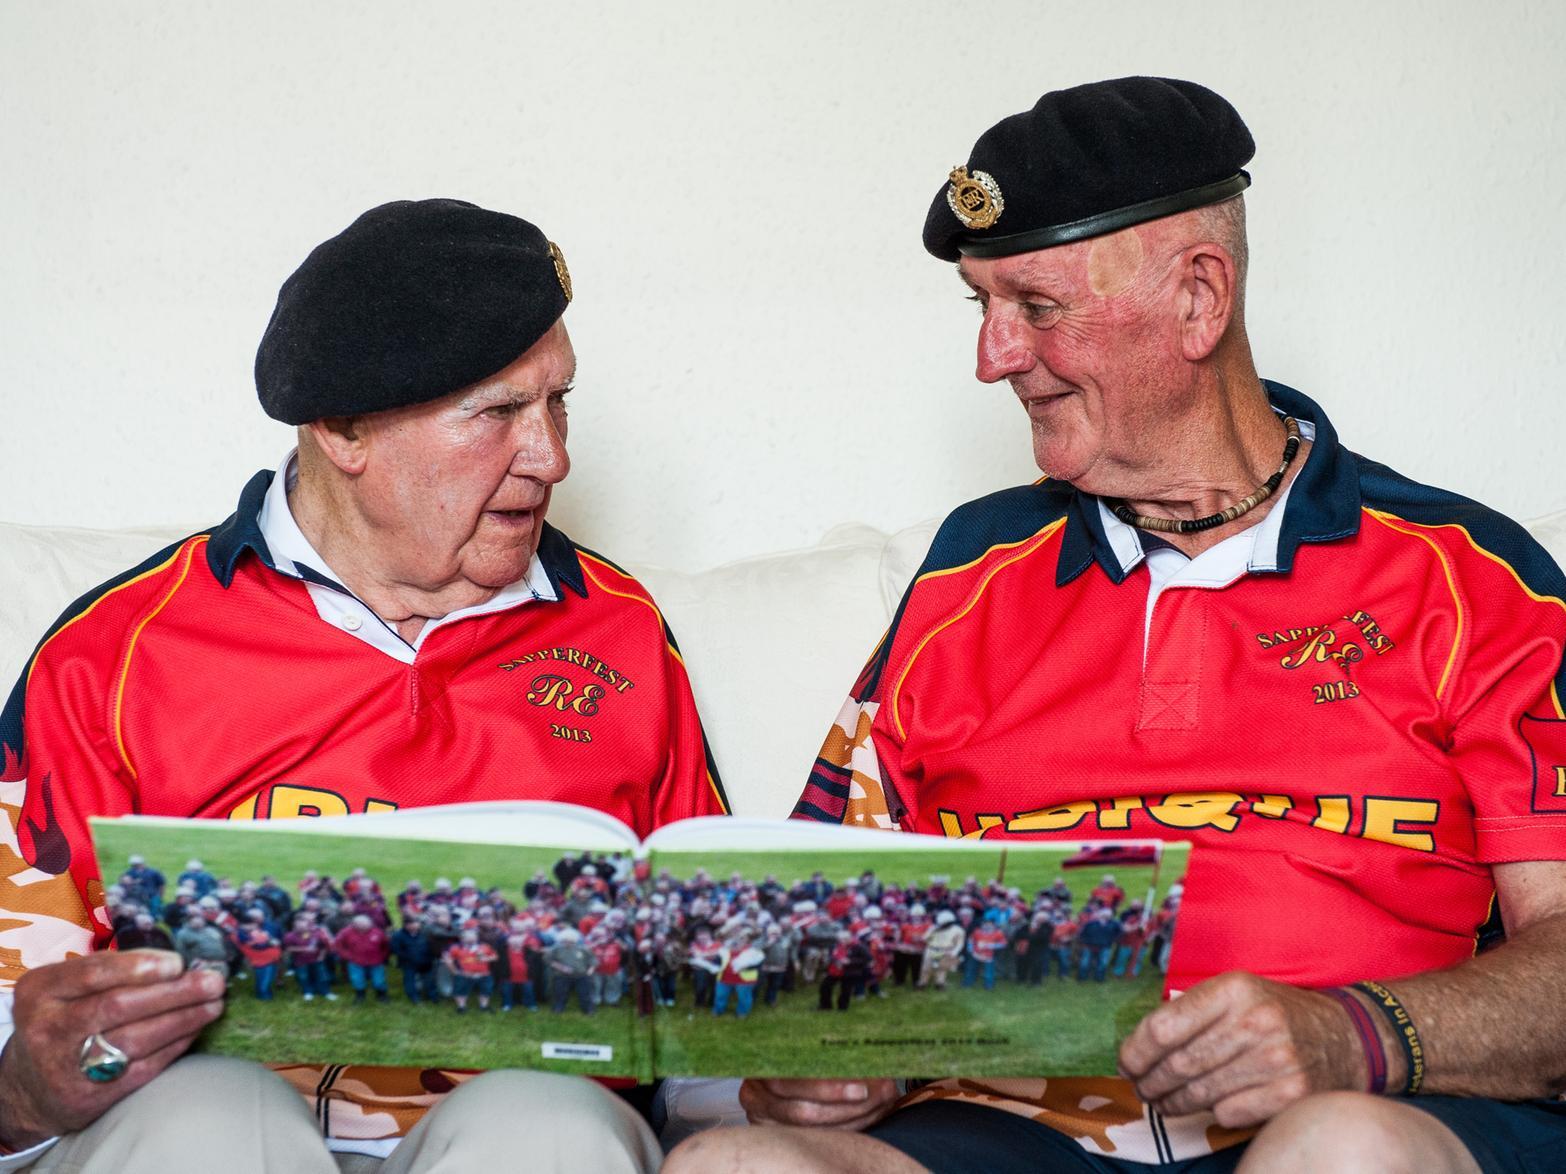 Sapper Bill Nicholson presents Tom Gilzean with a photobook of pictures from the 2013 Sapperfest which Tom attended as the oldest sapper at the age of 93